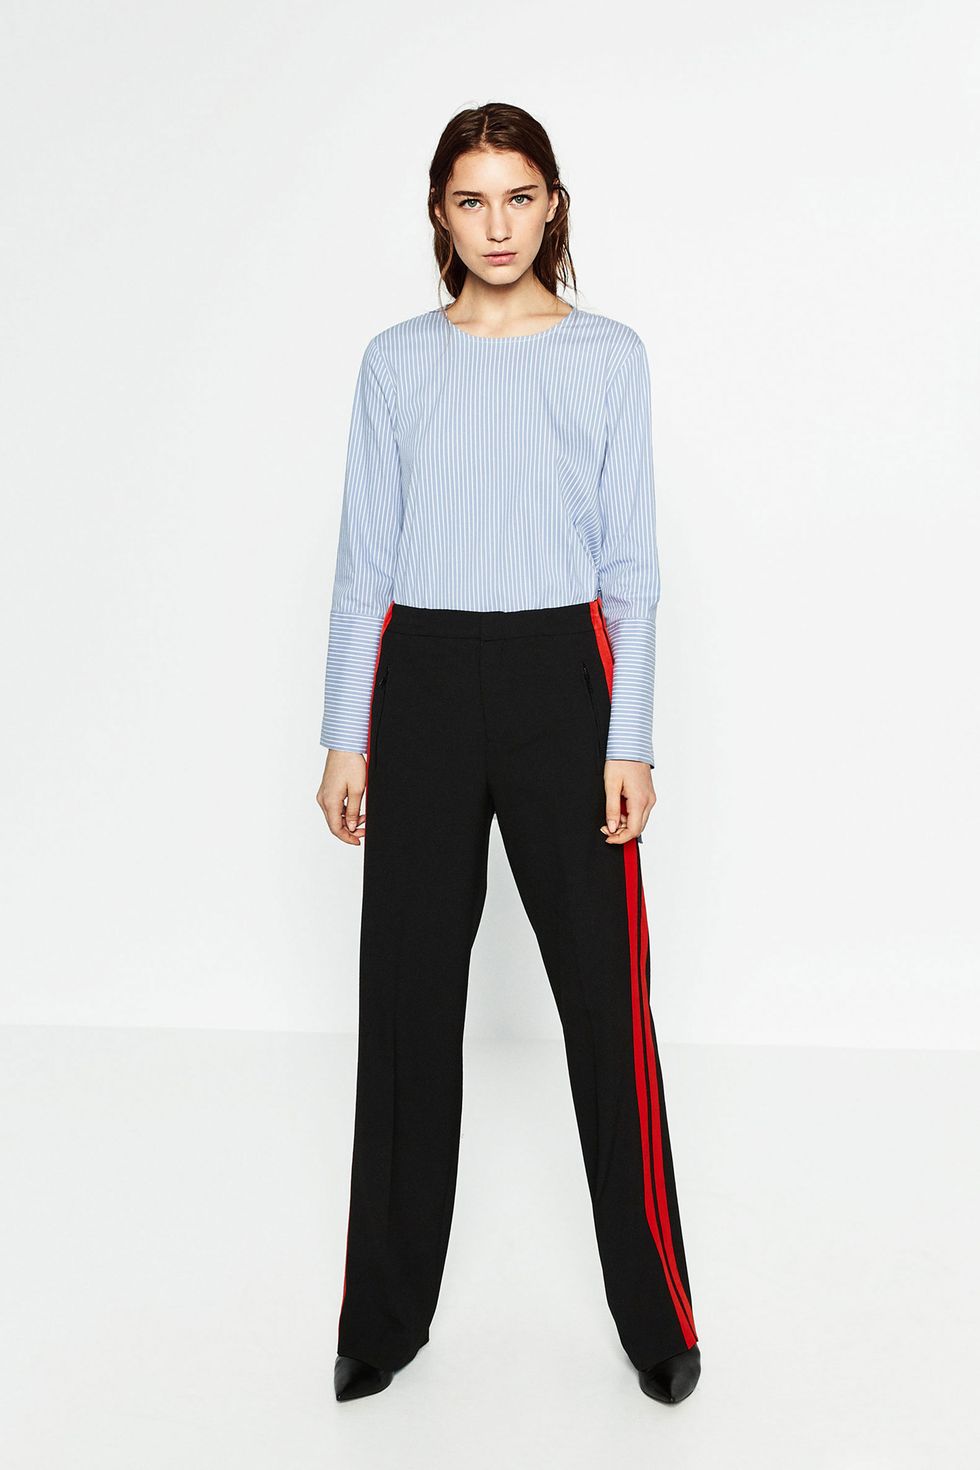 Zara wide leg trousers with stripe become fashion must-have